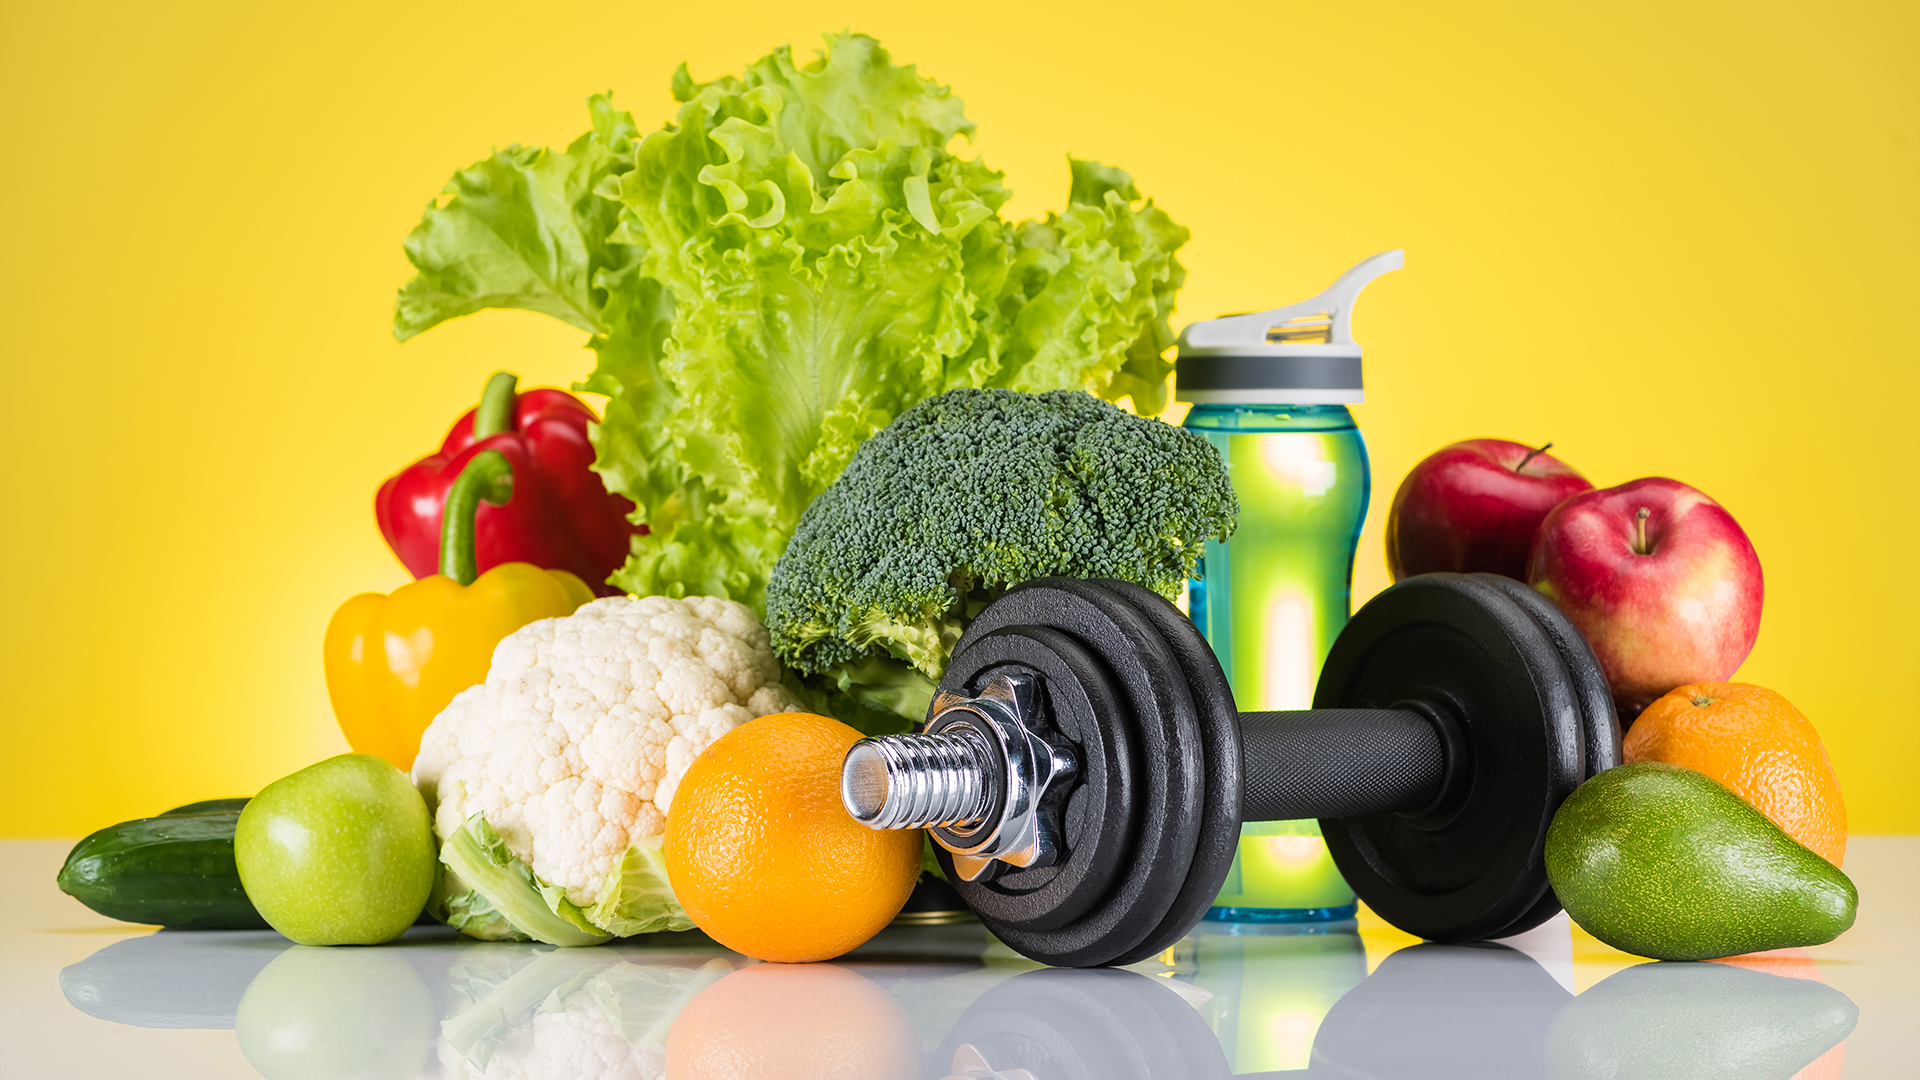 Close up view of dumbbell, bottle of water and fruit and veg